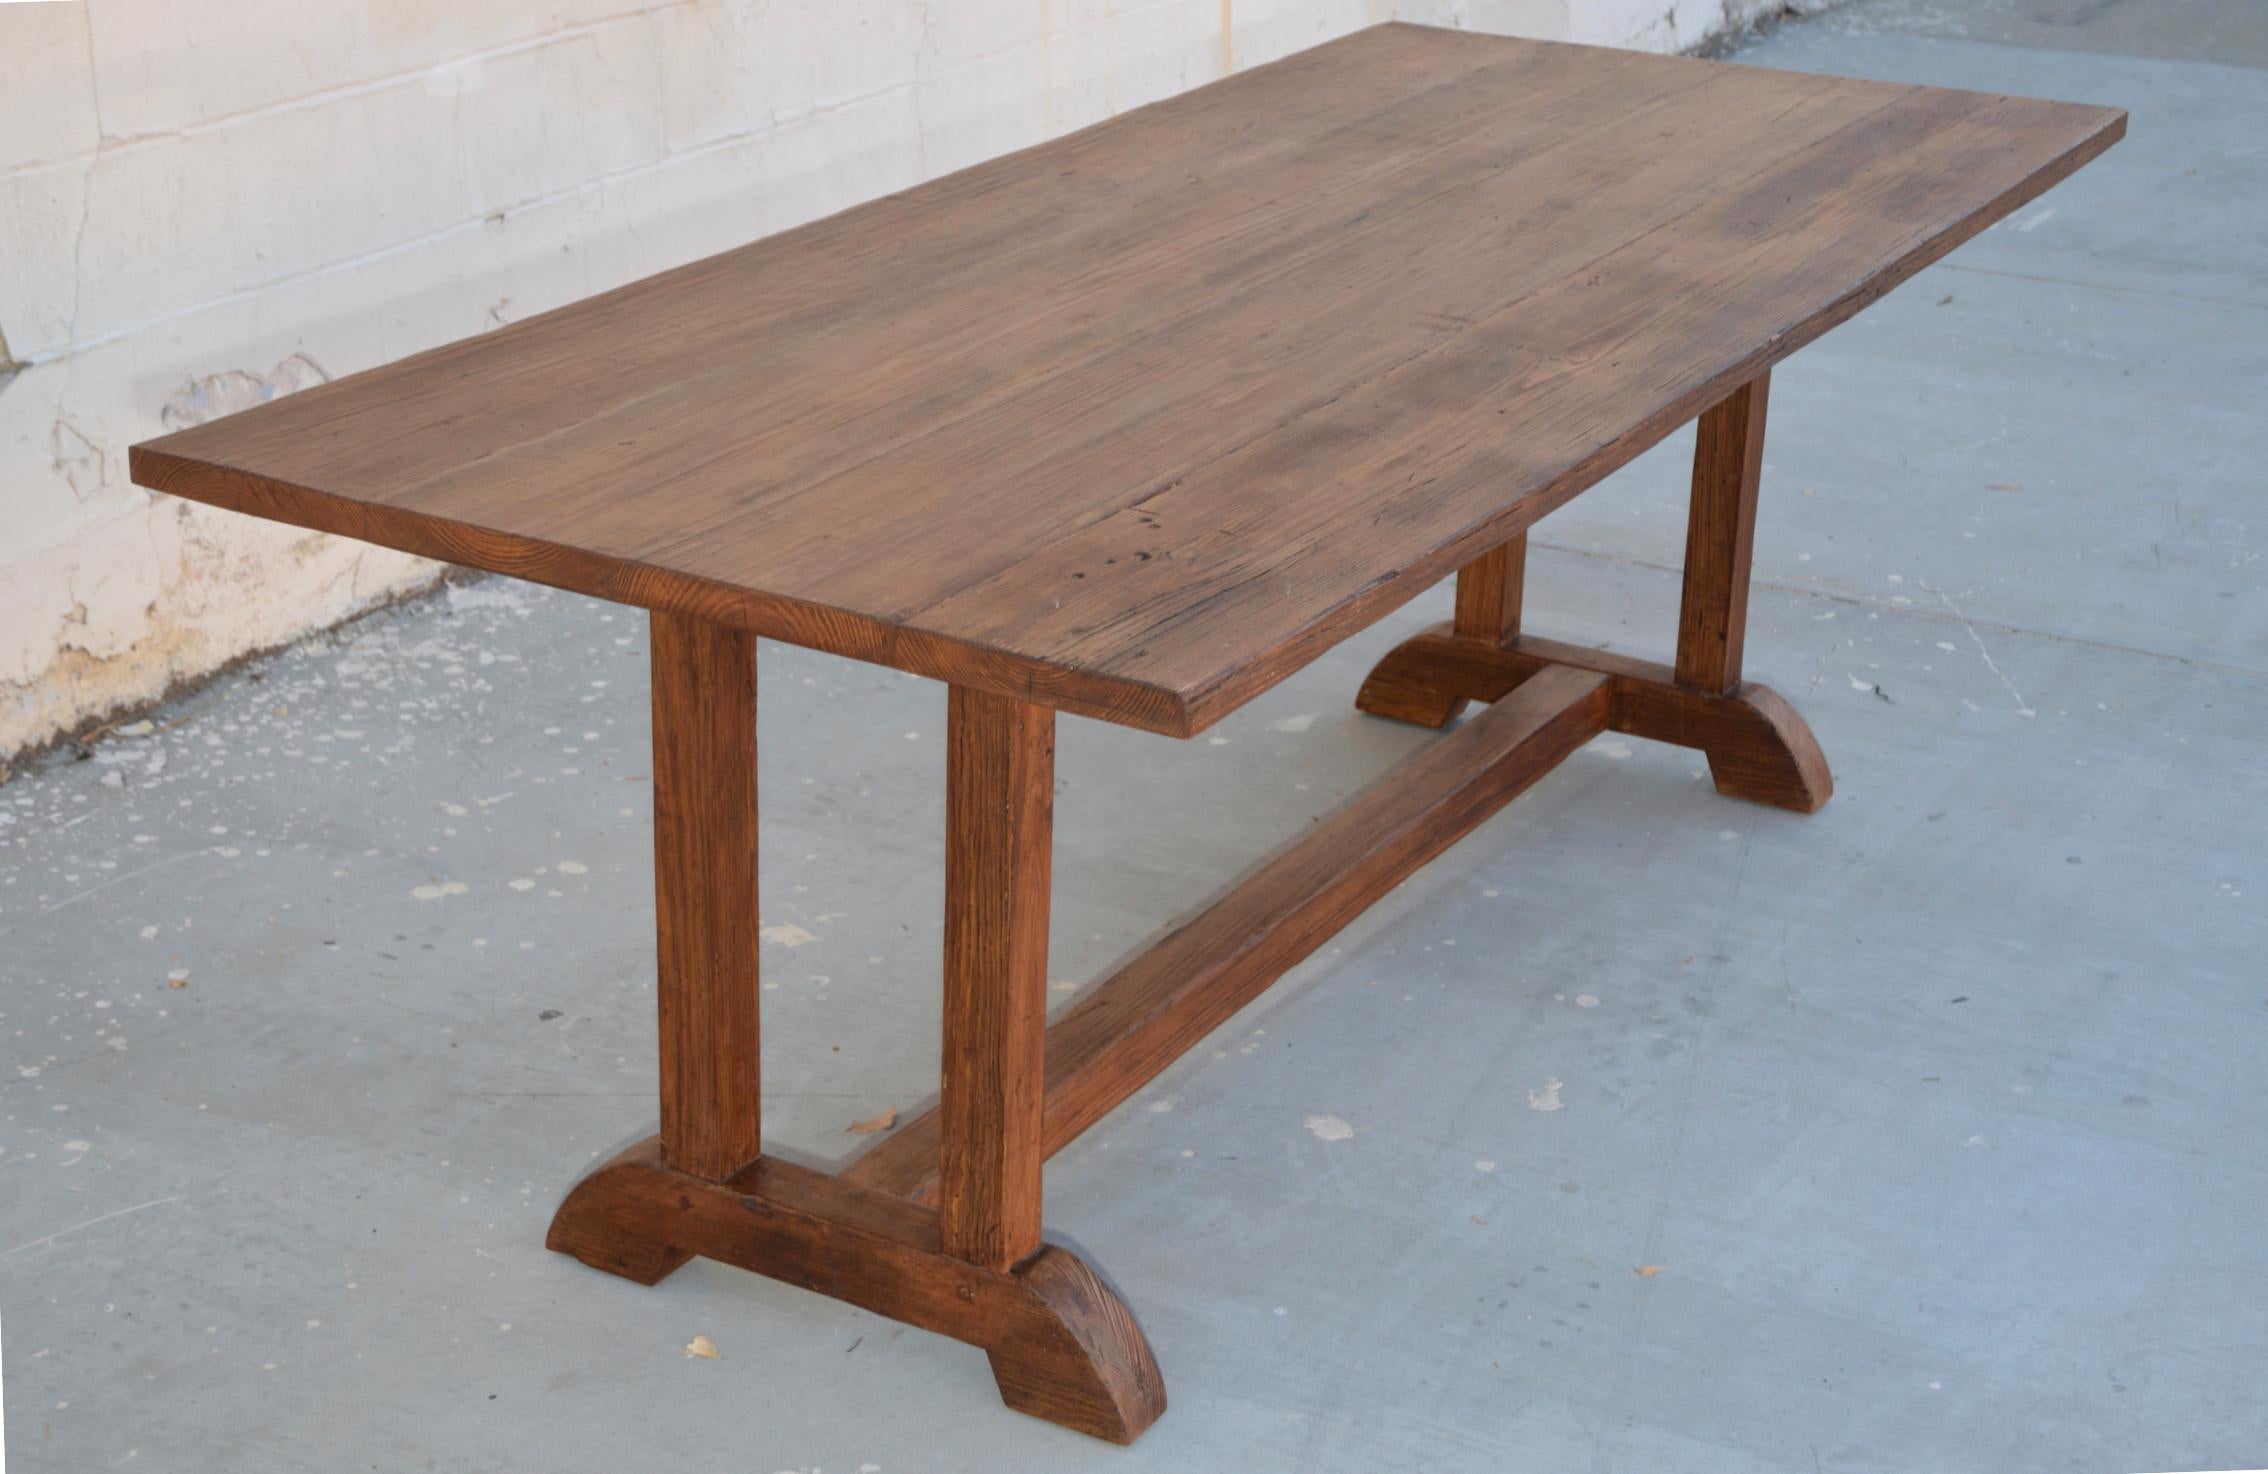 This custom dining table is made from hand selected, reclaimed heart-pine. Size shown here: 96